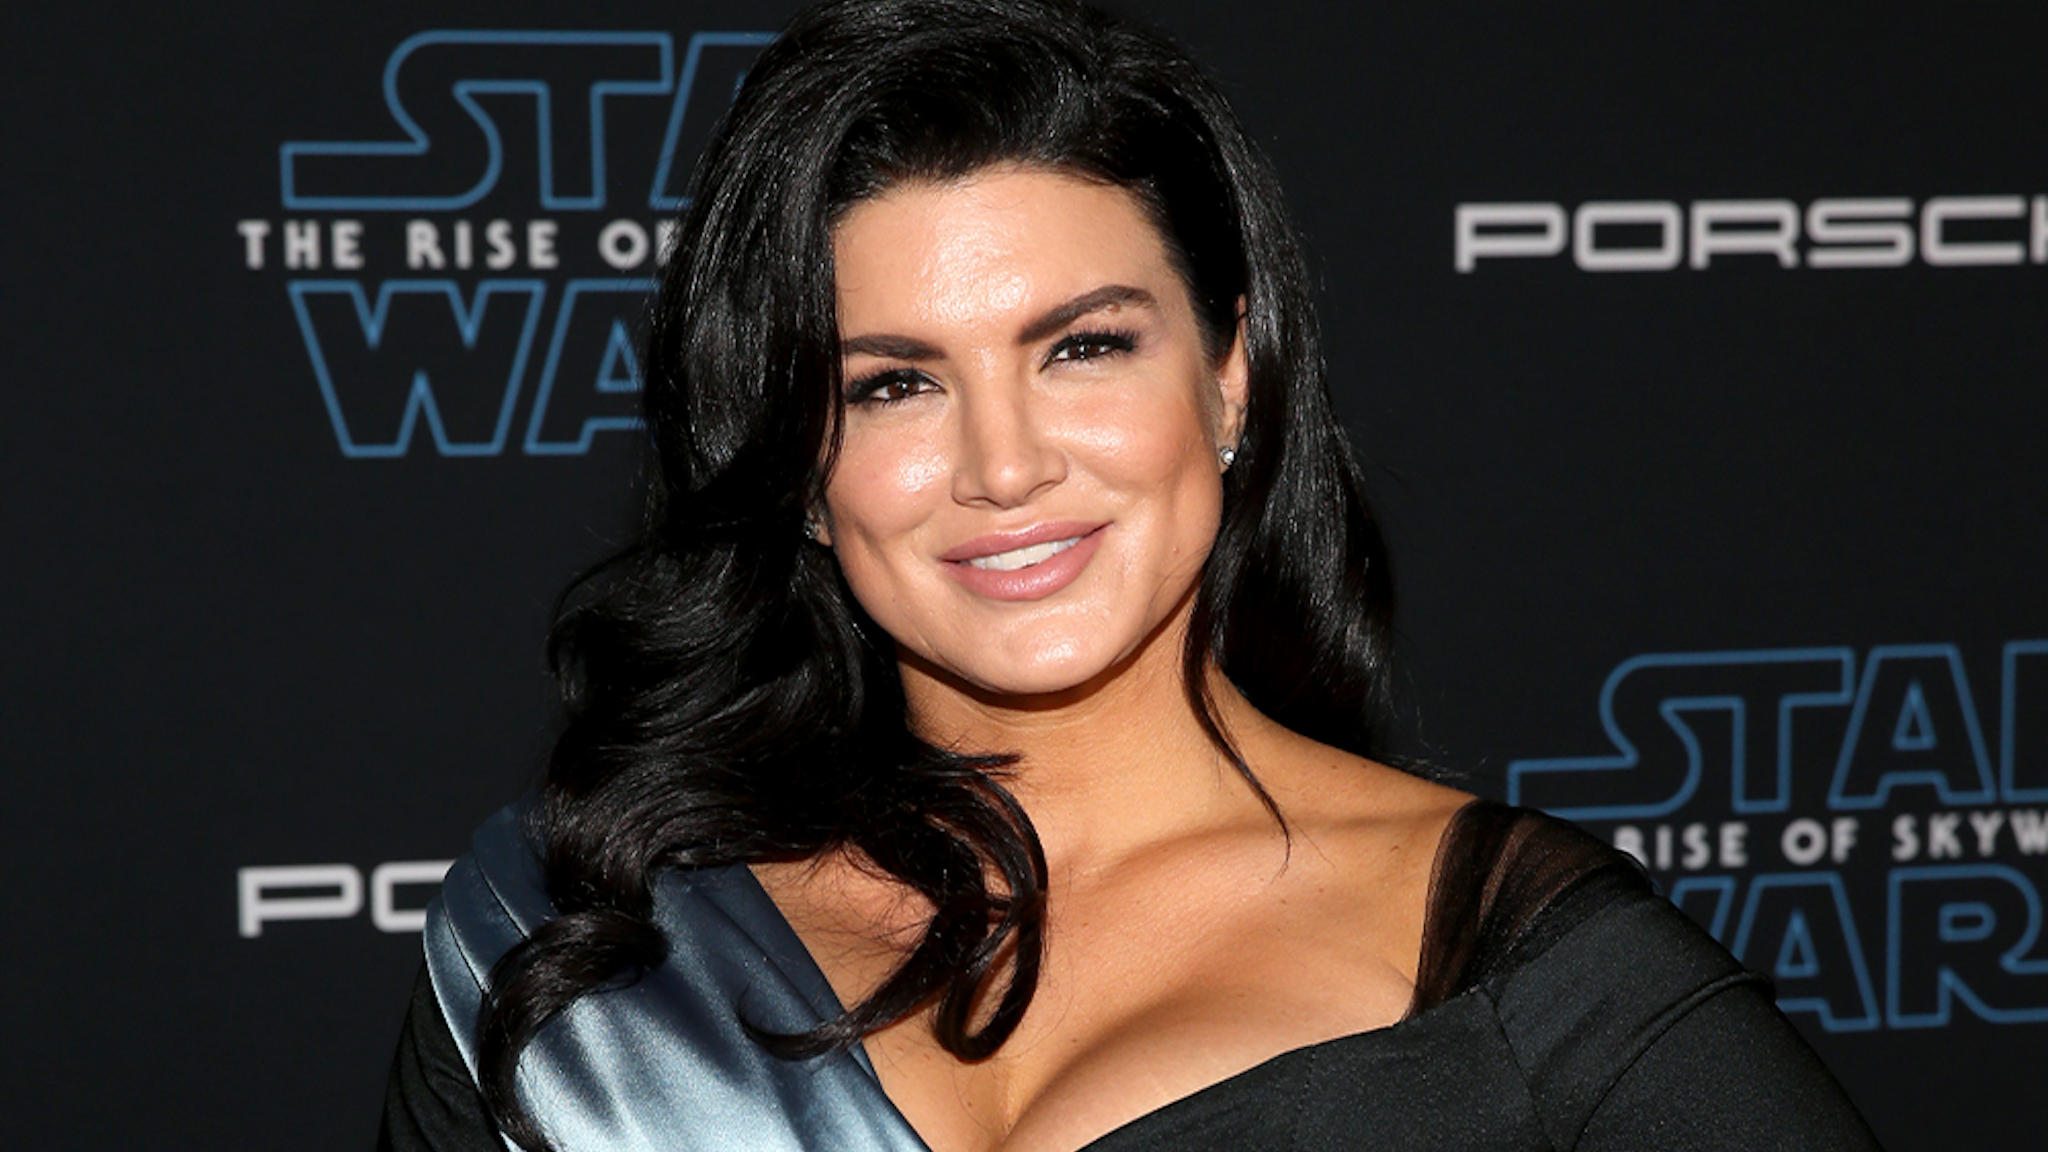 HOLLYWOOD, CALIFORNIA - DECEMBER 16: Gina Carano arrives for the World Premiere of "Star Wars: The Rise of Skywalker", the highly anticipated conclusion of the Skywalker saga on December 16, 2019 in Hollywood, California.